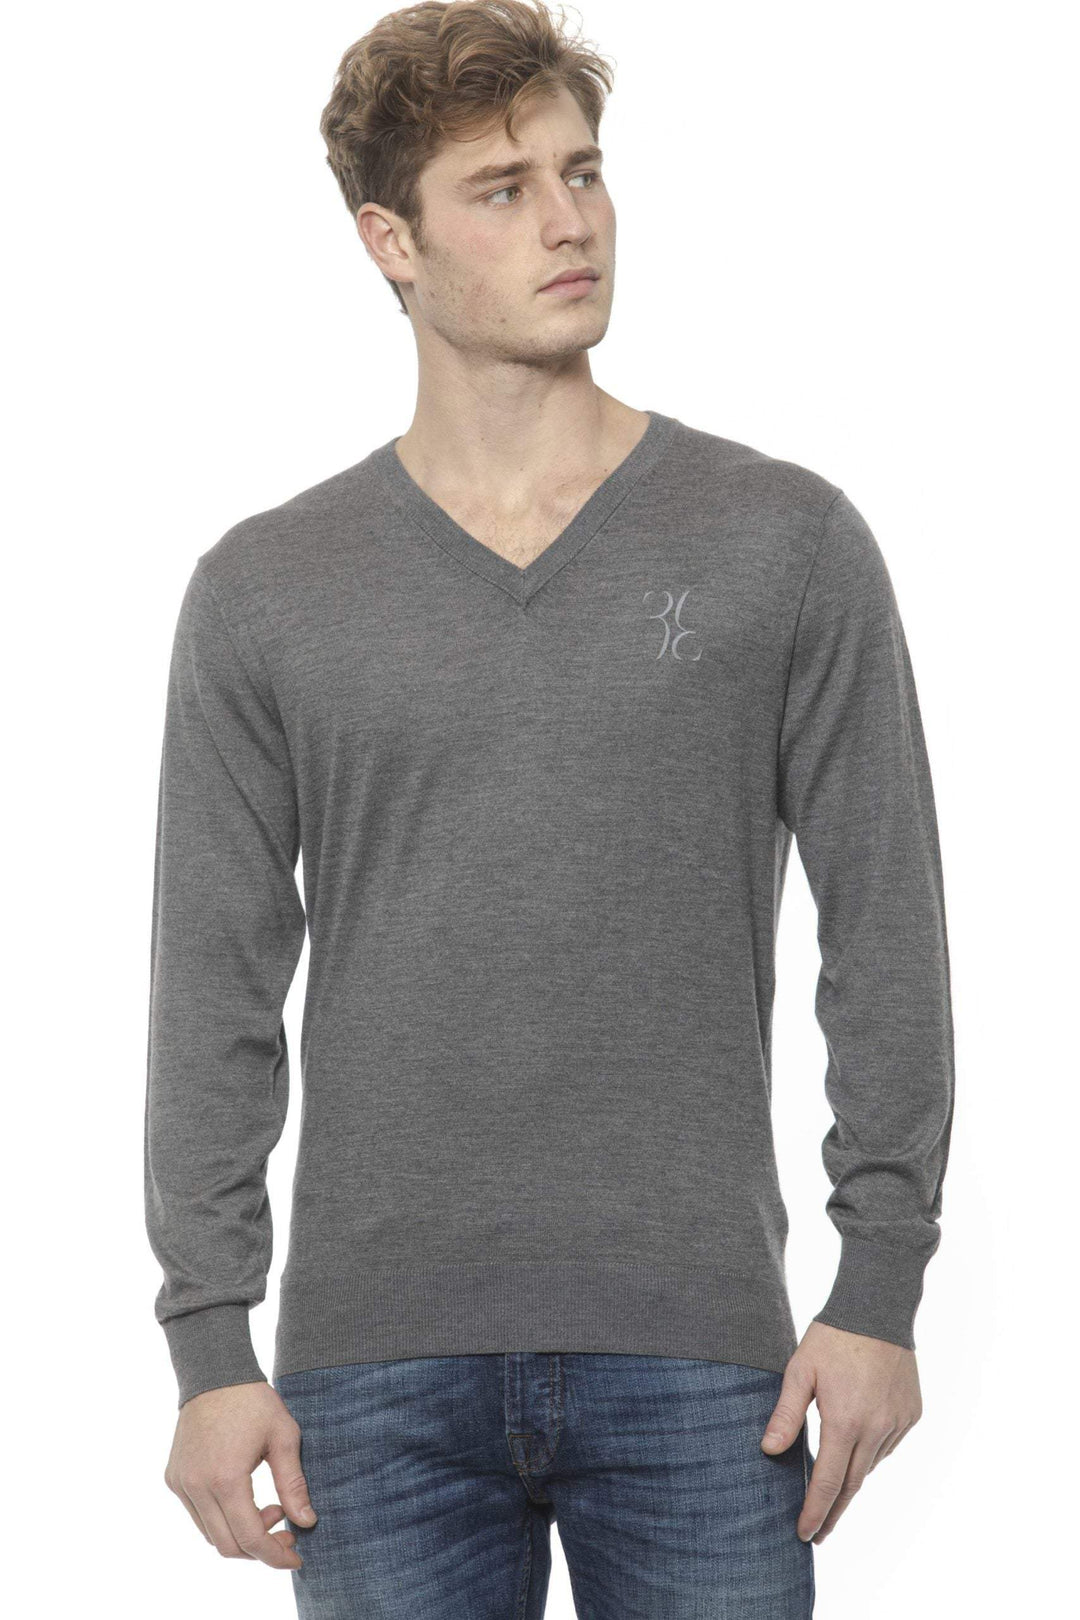 Billionaire Italian Couture v-neck emboidered  Sweater #men, 3XL, Billionaire Italian Couture, feed-agegroup-adult, feed-color-Gray, feed-gender-male, Gray, L, M, Sweaters - Men - Clothing, XL, XXL at SEYMAYKA